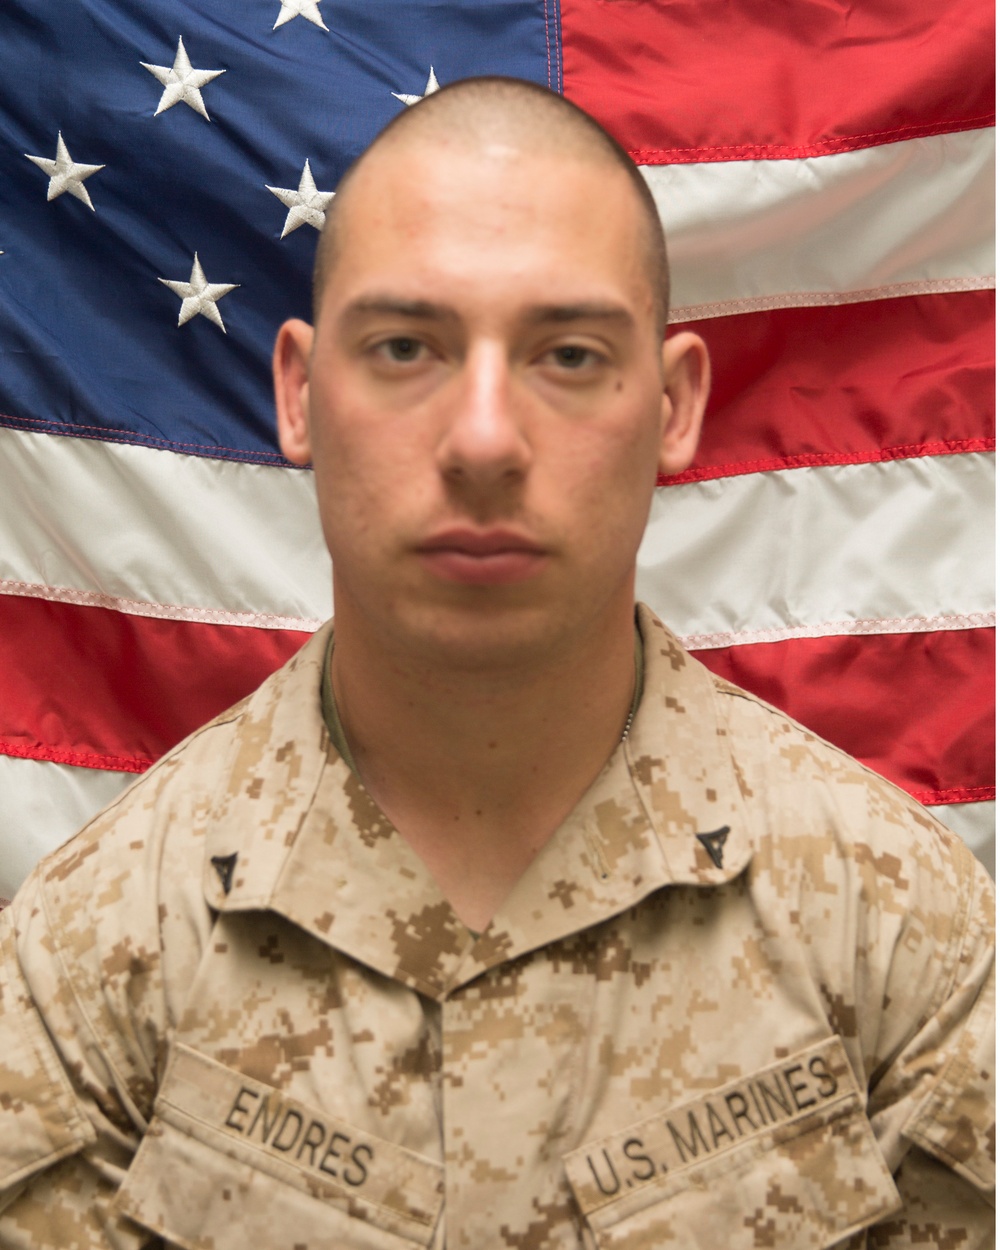 Ohio native serving with the 24th MEU